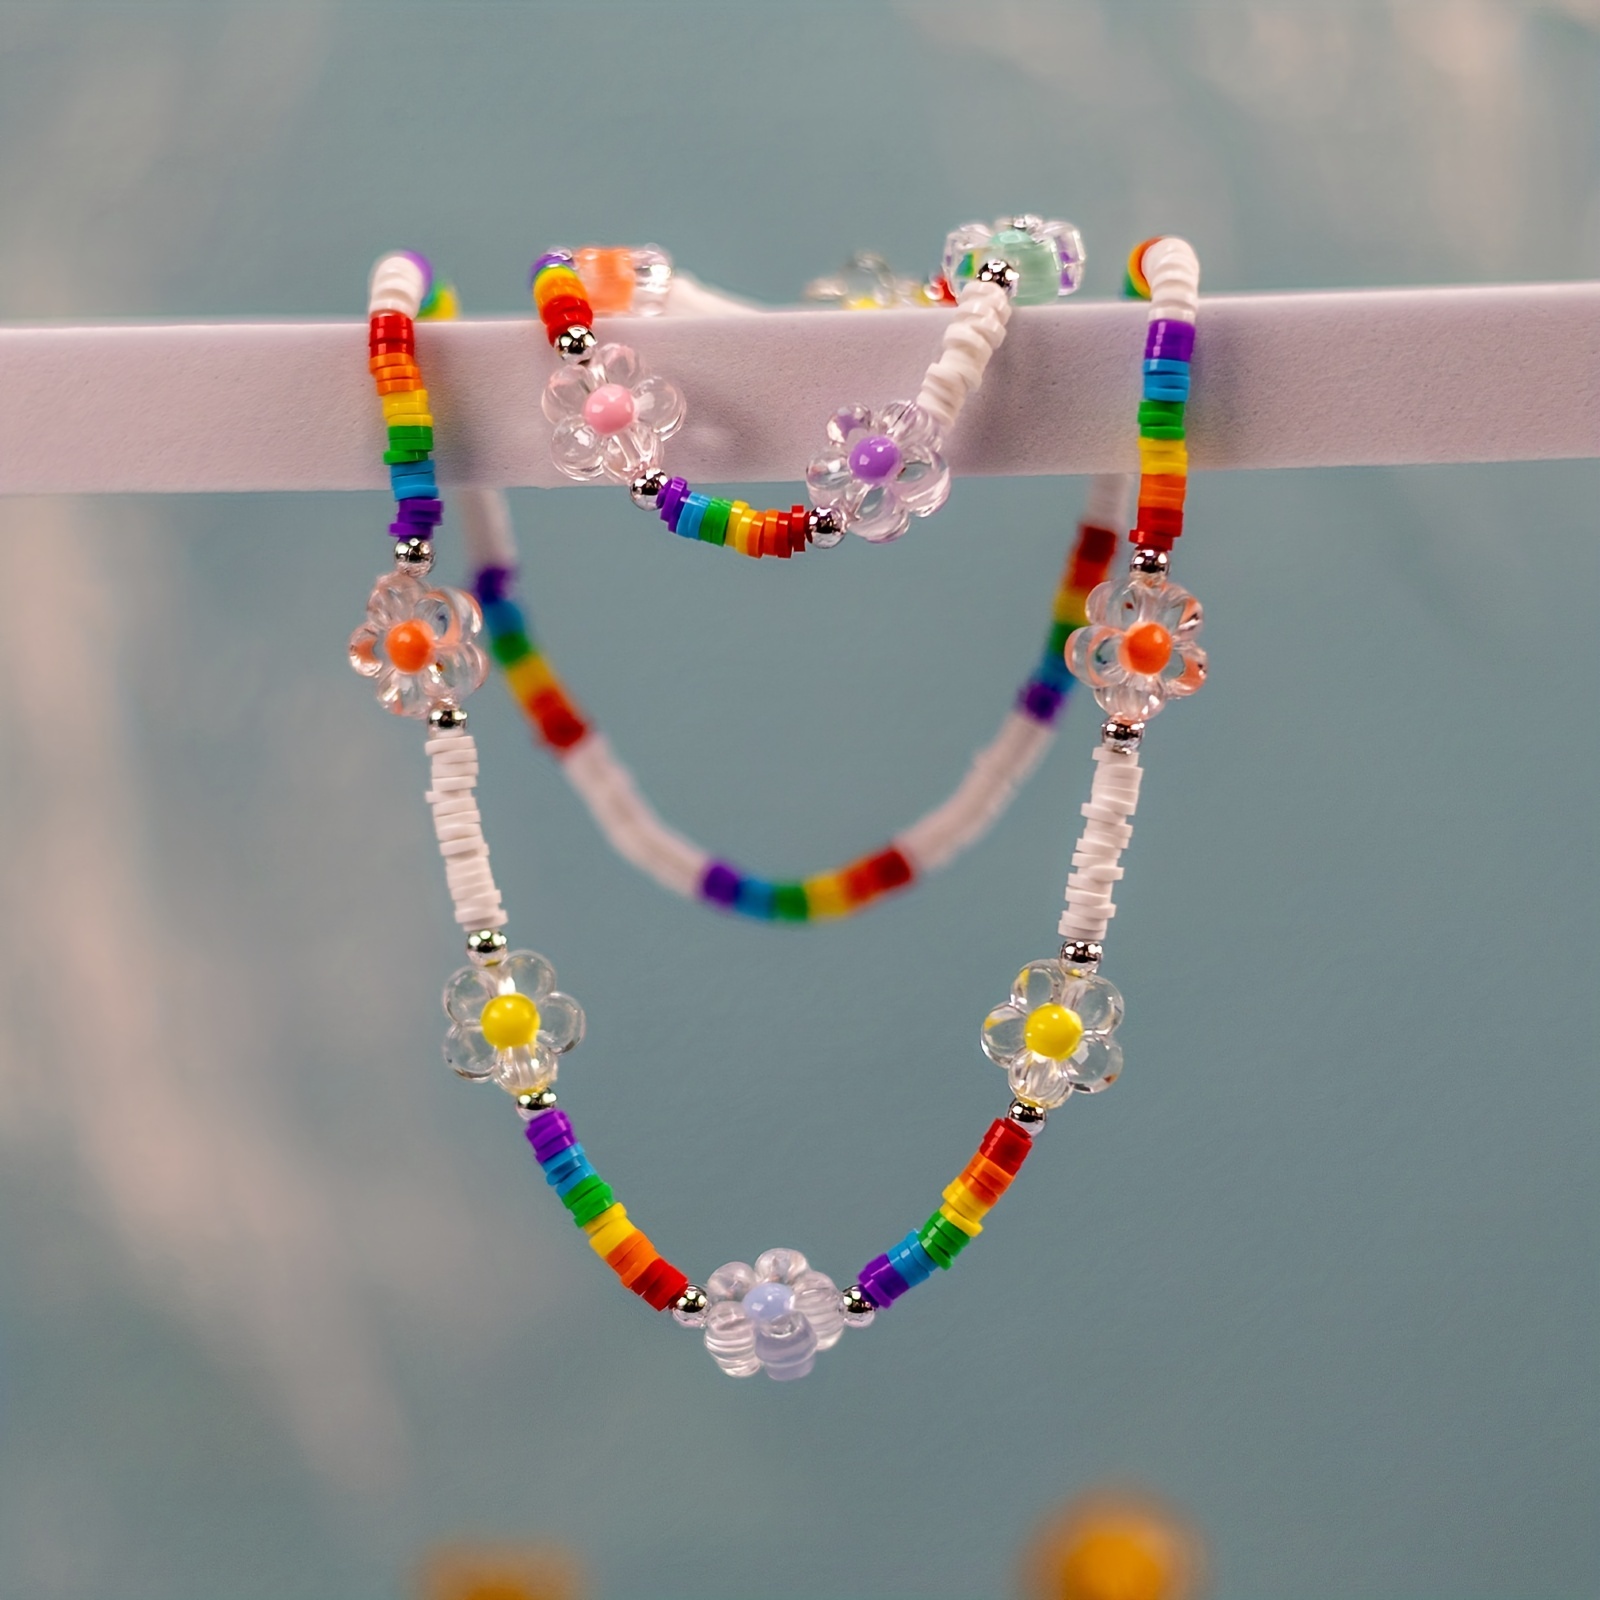 Boho Rainbow Beaded Choker Necklace Beach Seed Beads Necklaces for Women  Teen Girls Multi Colorful Shell Pendant Bead Layered Neck Chain Jewelry